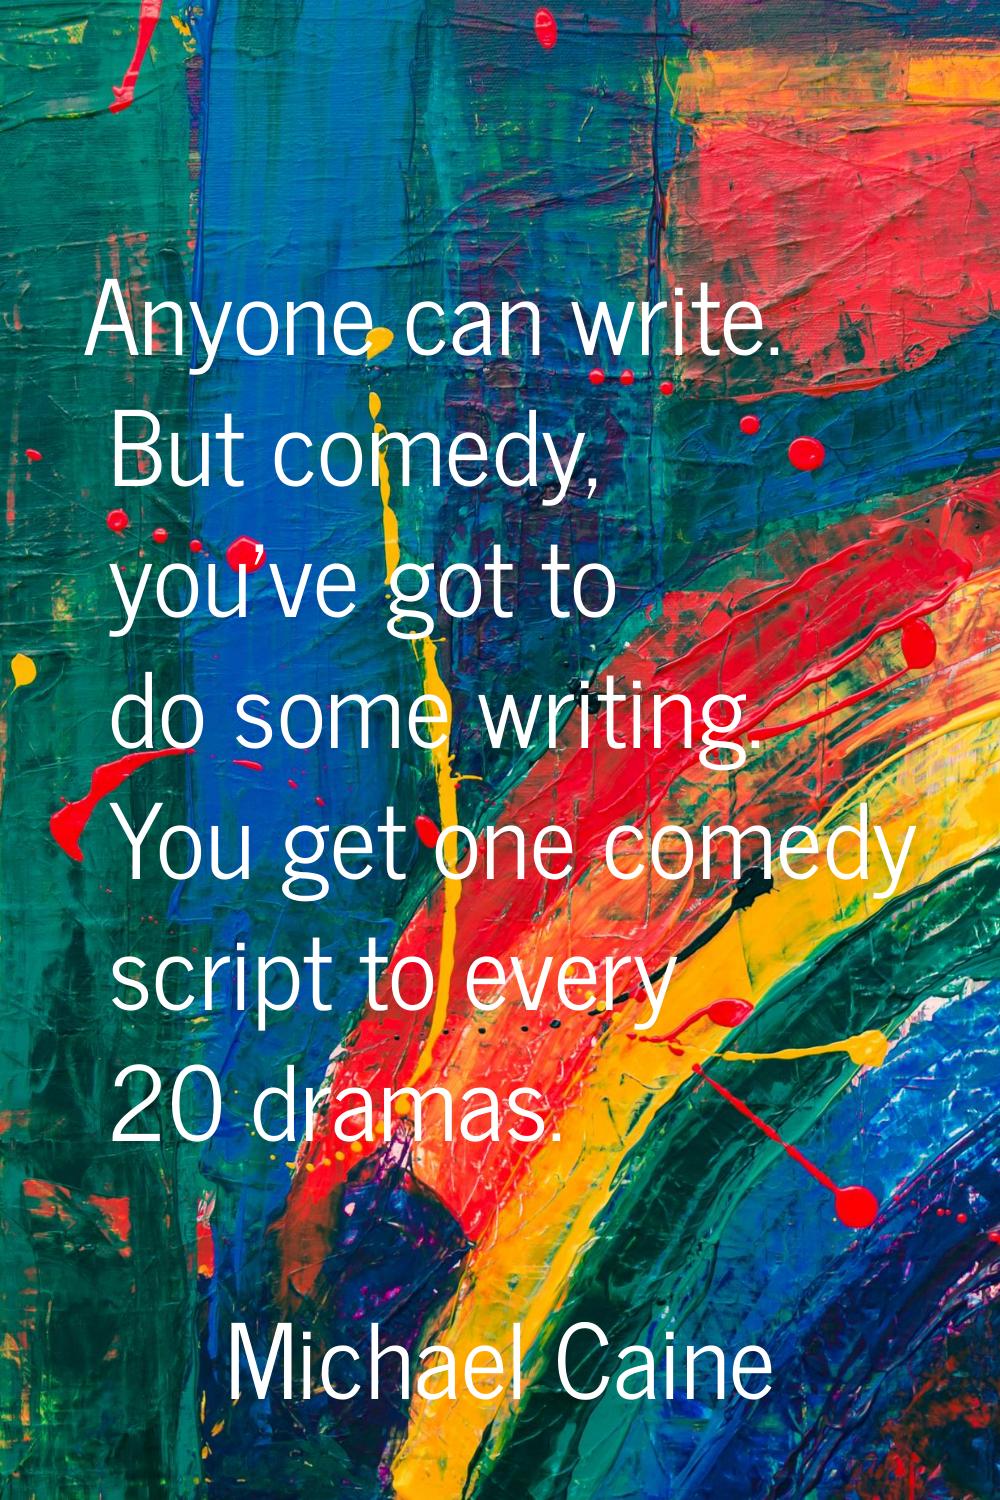 Anyone can write. But comedy, you've got to do some writing. You get one comedy script to every 20 